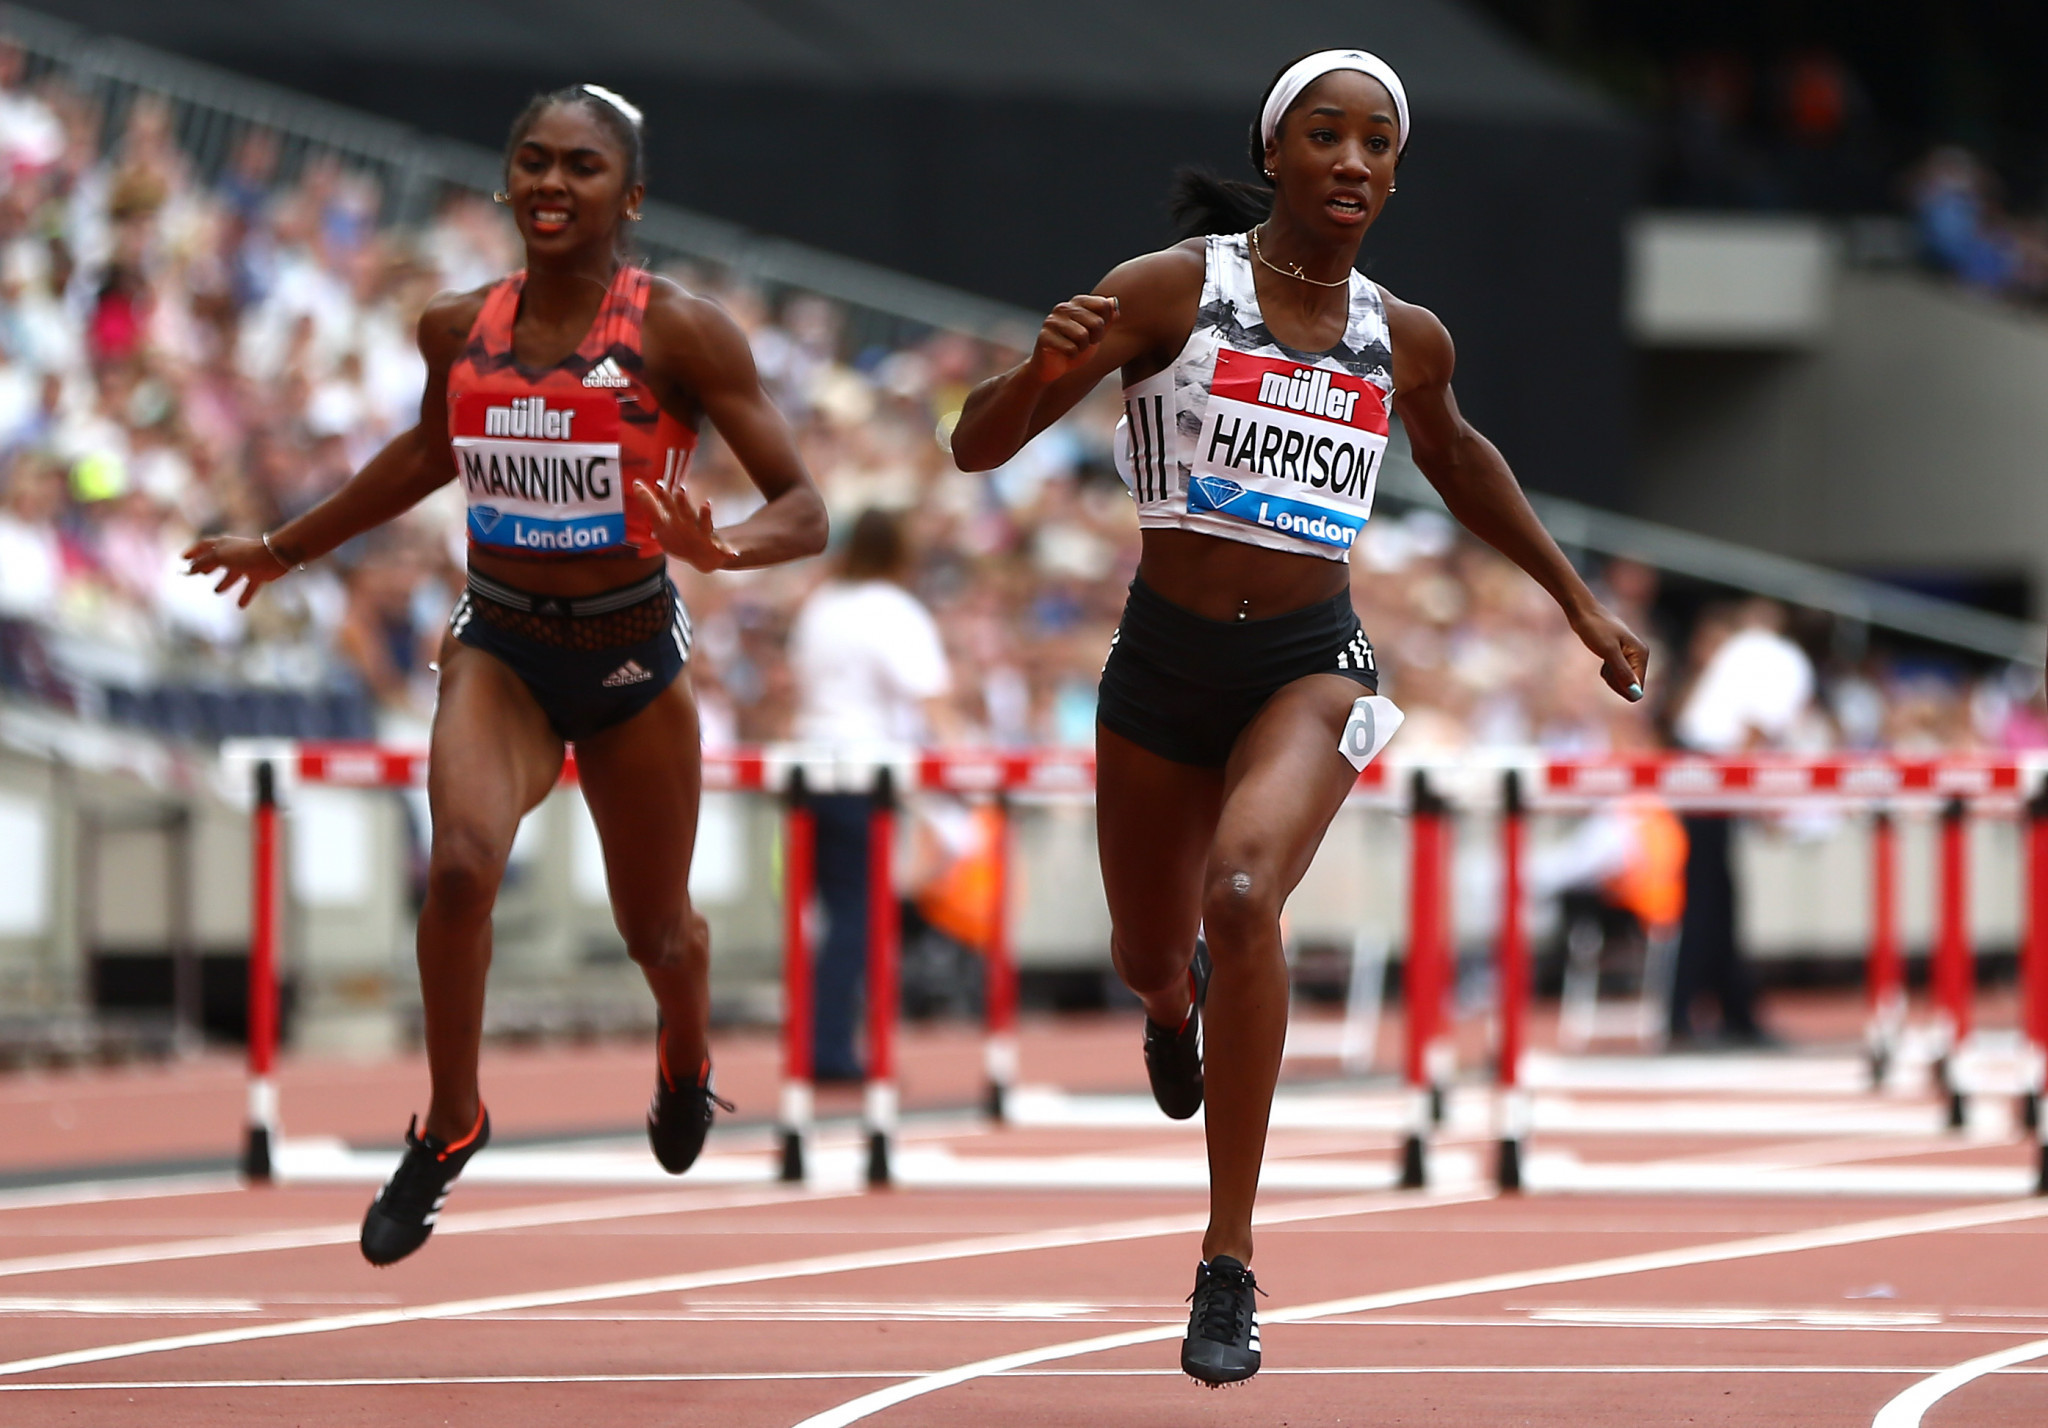 Women's 100m hurdles world recorder holder Kendra Harrison is set to lead the American team at the  NACAC Championships at the Varisty Stadium in Toronto ©Getty Images